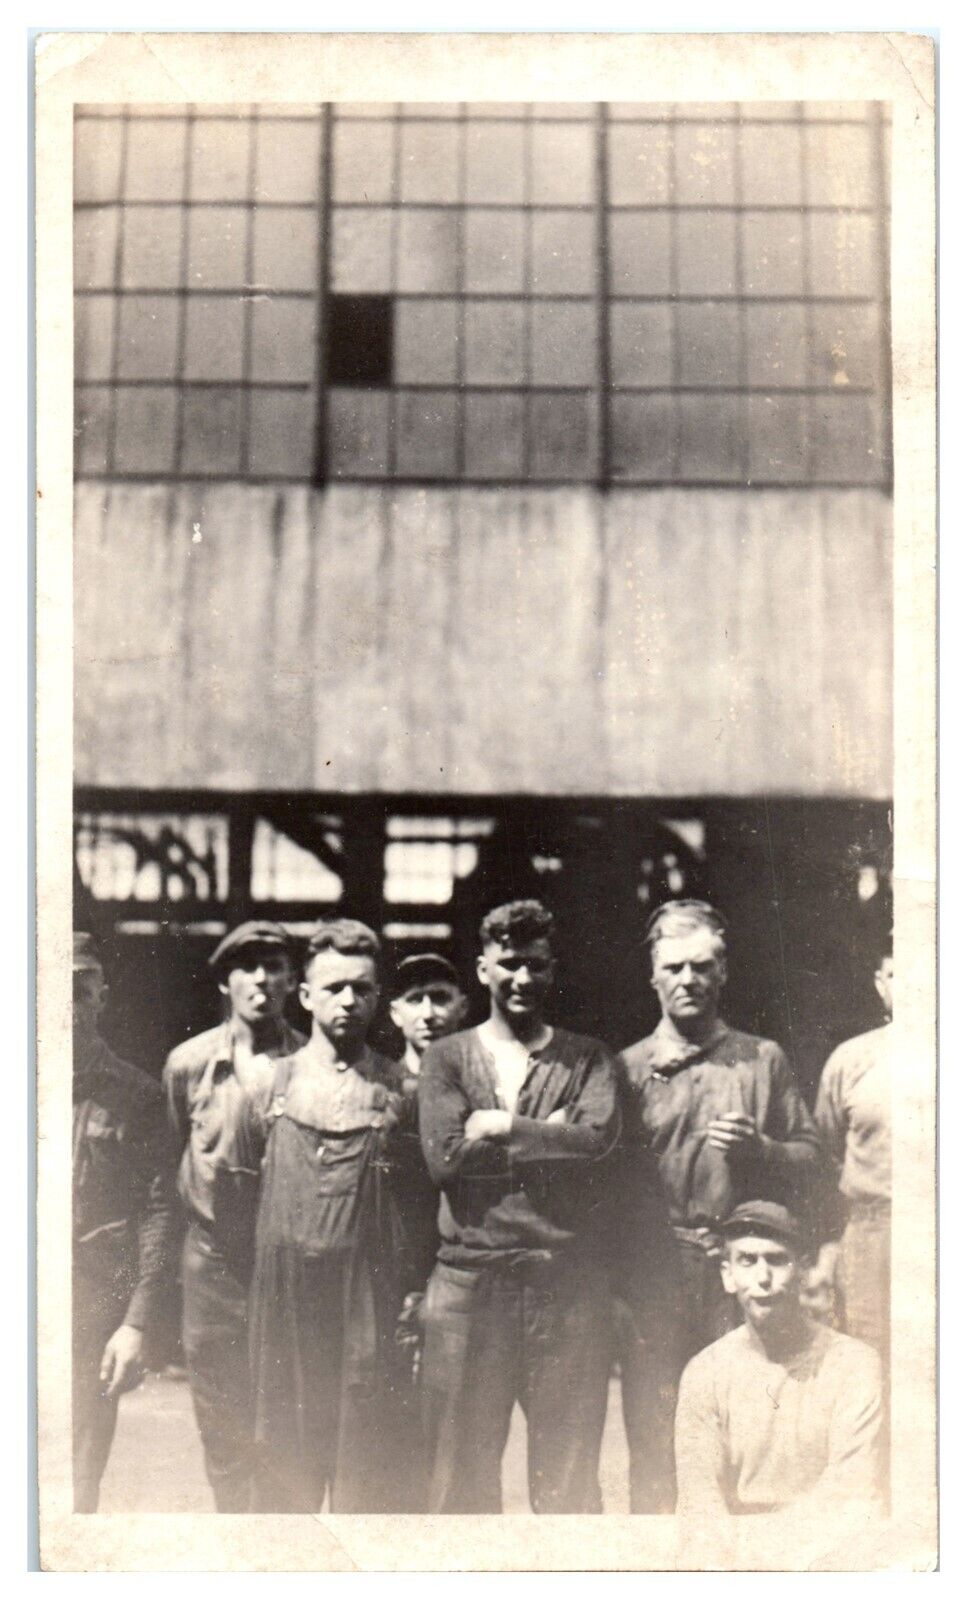  1920's Occupational Factory Workers Posing Silly Goofy Foundry MEN VTG Photo VV